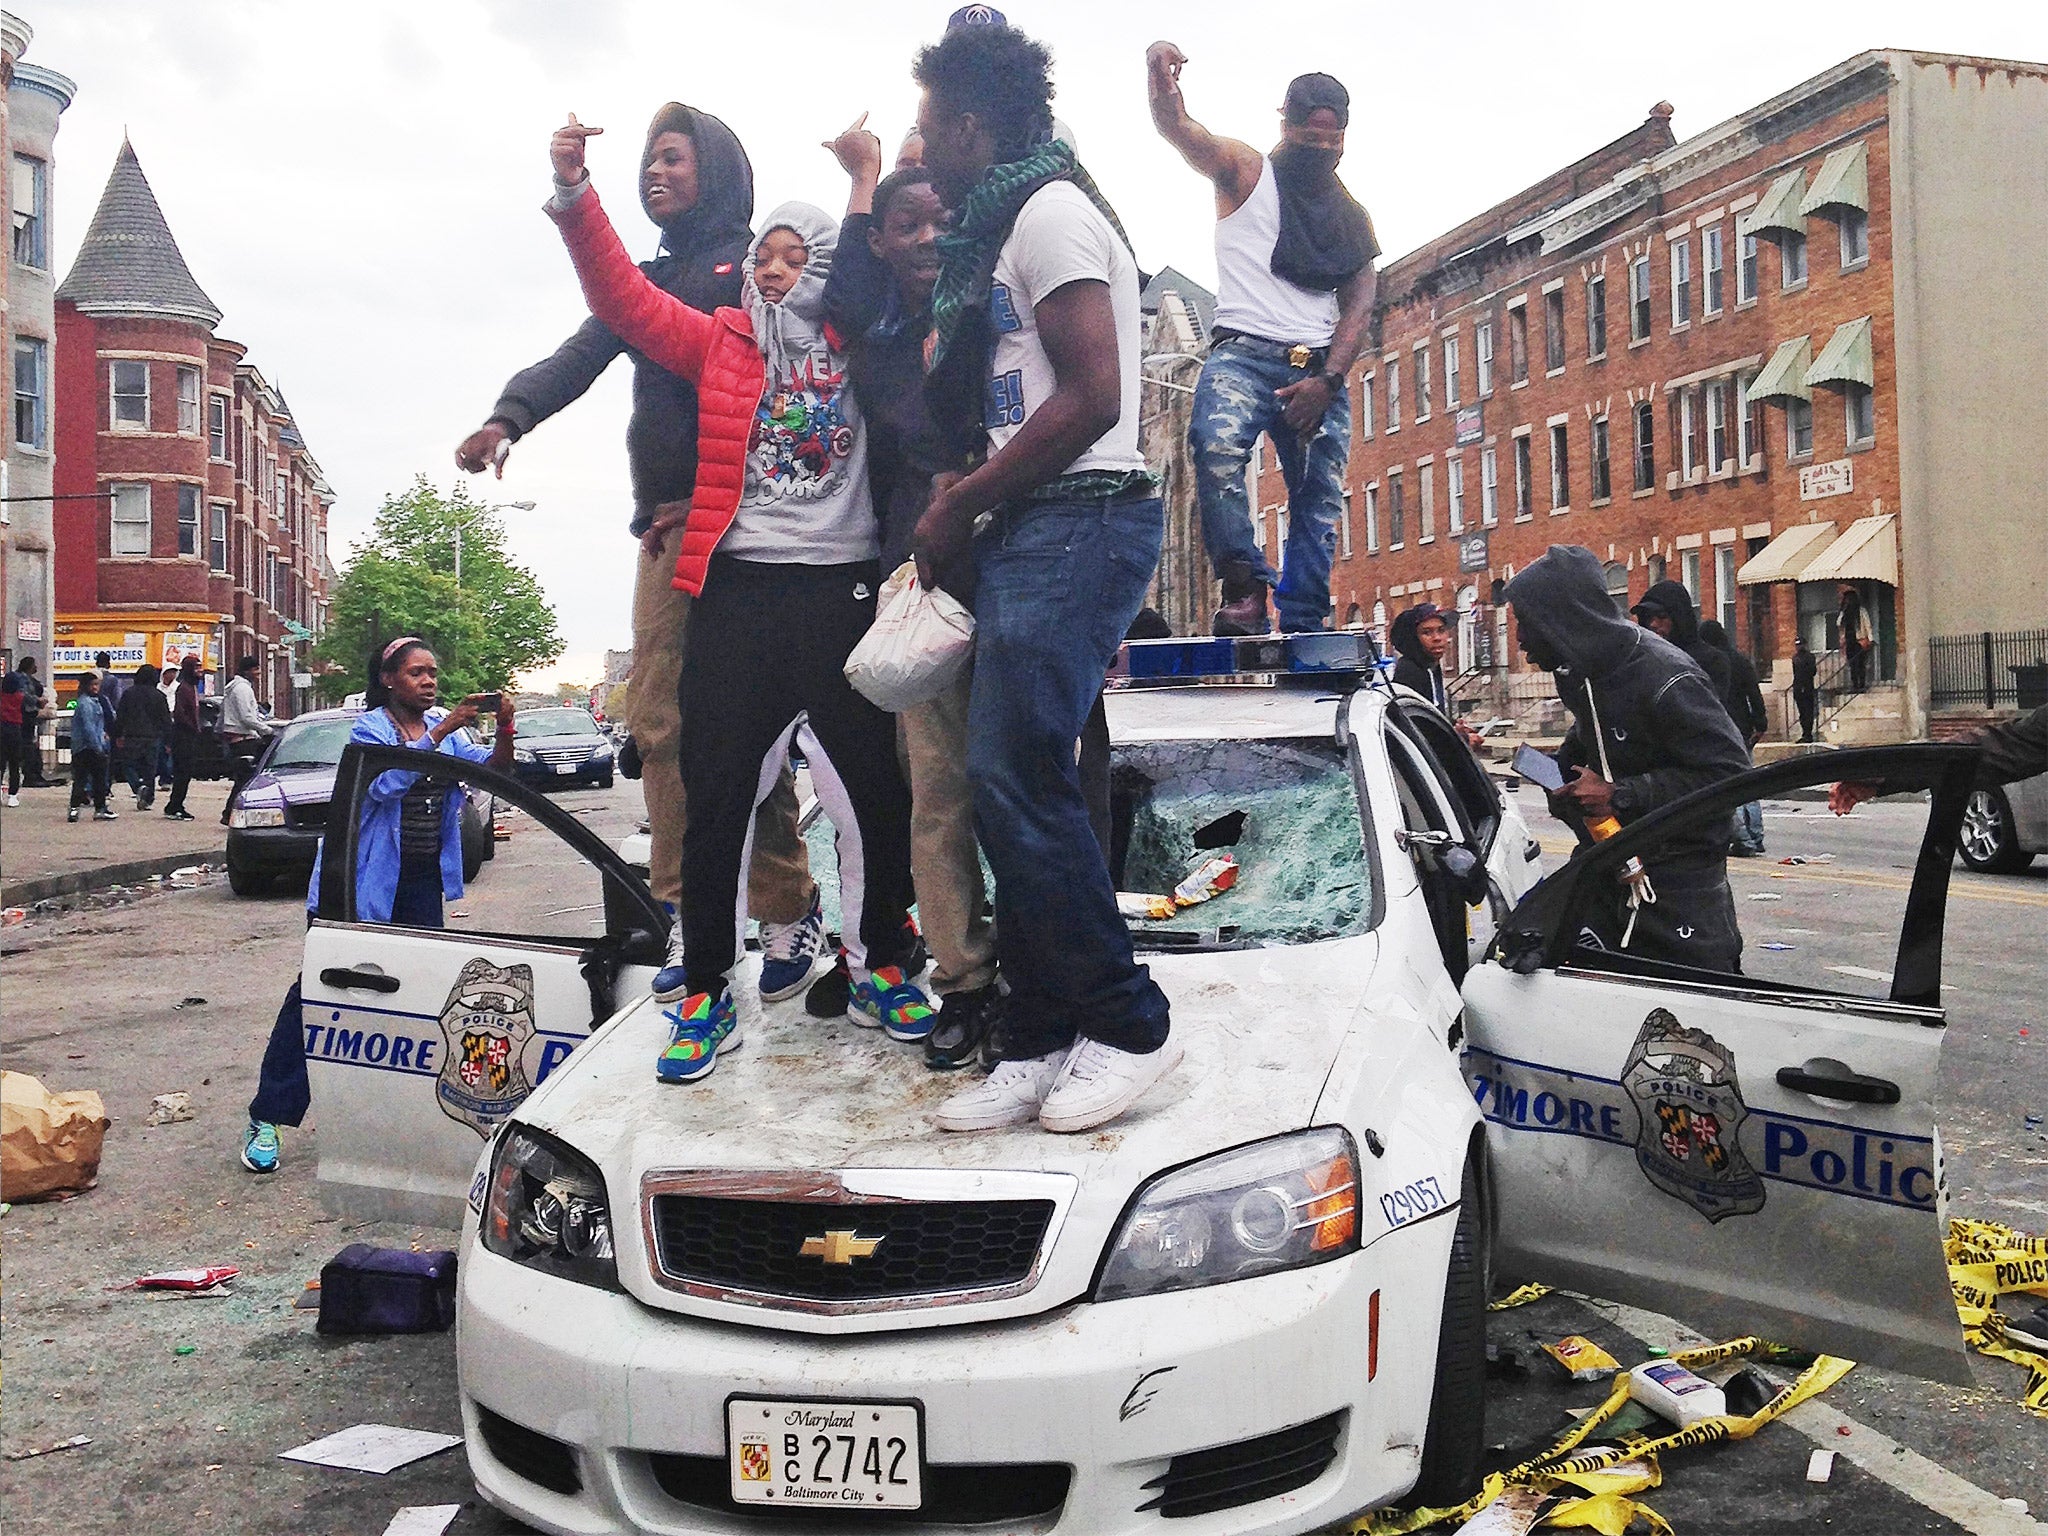 Protesters stand on top of a police car destroyed during Monday night's rioting